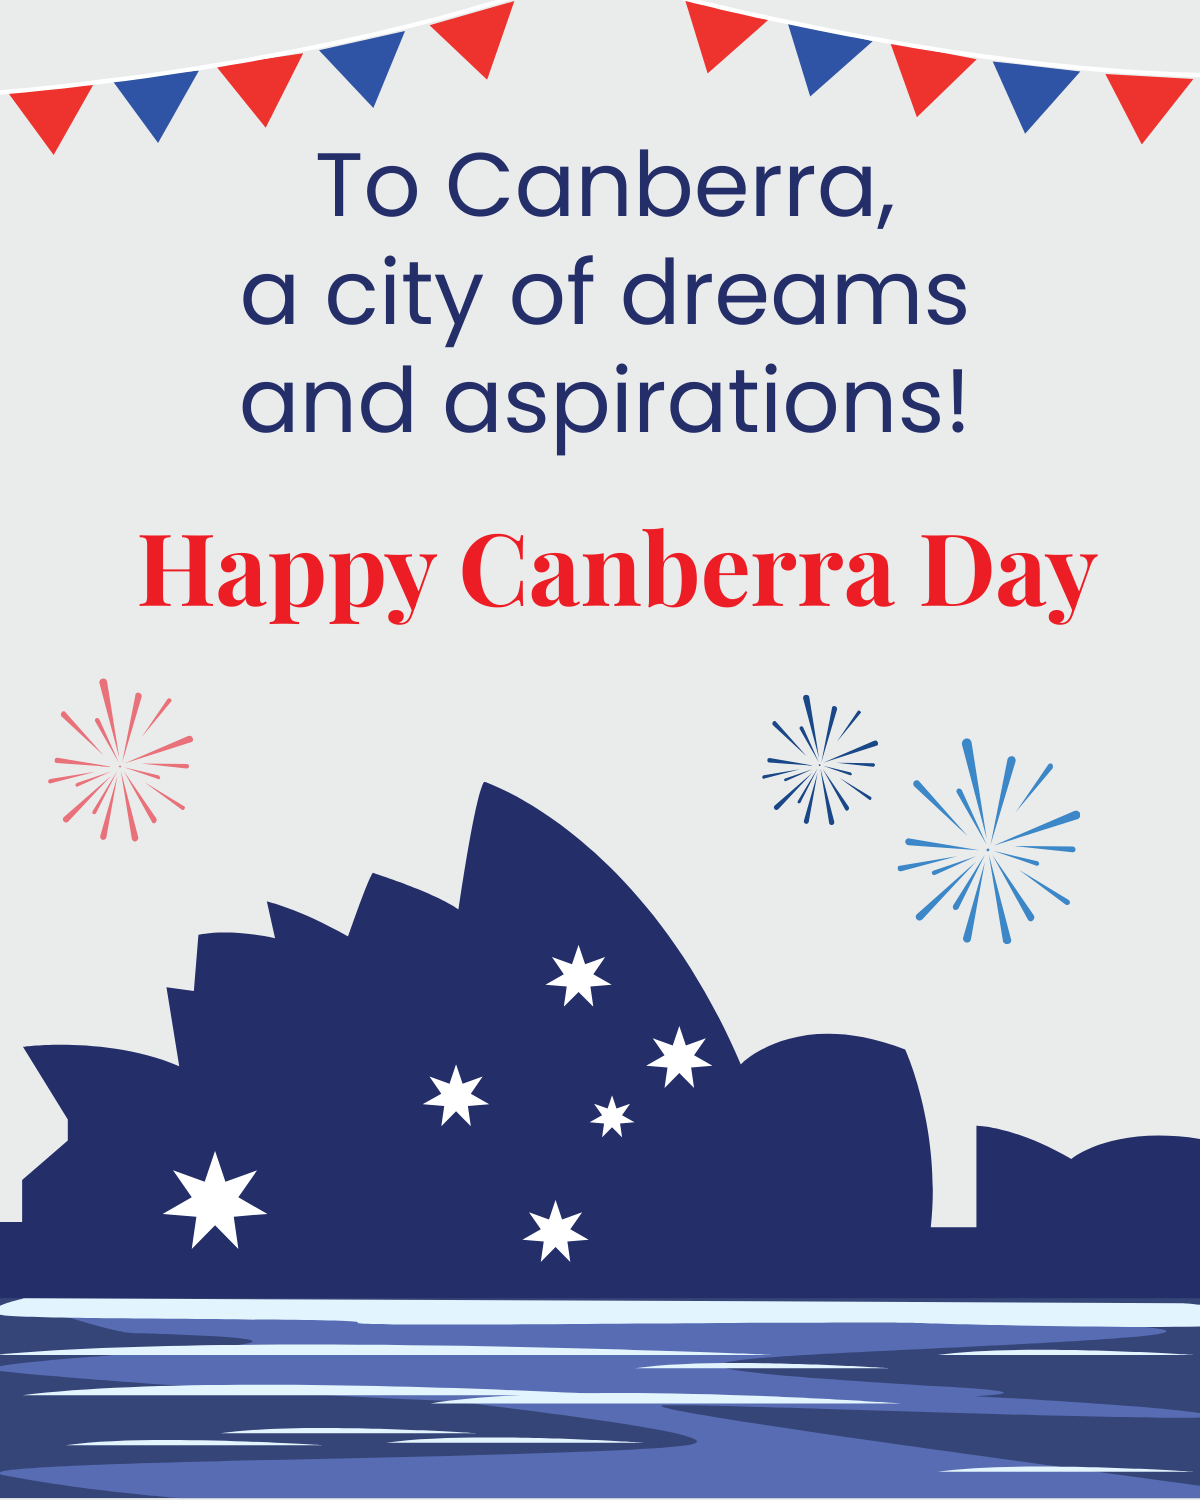 Canberra Day Facebook Post